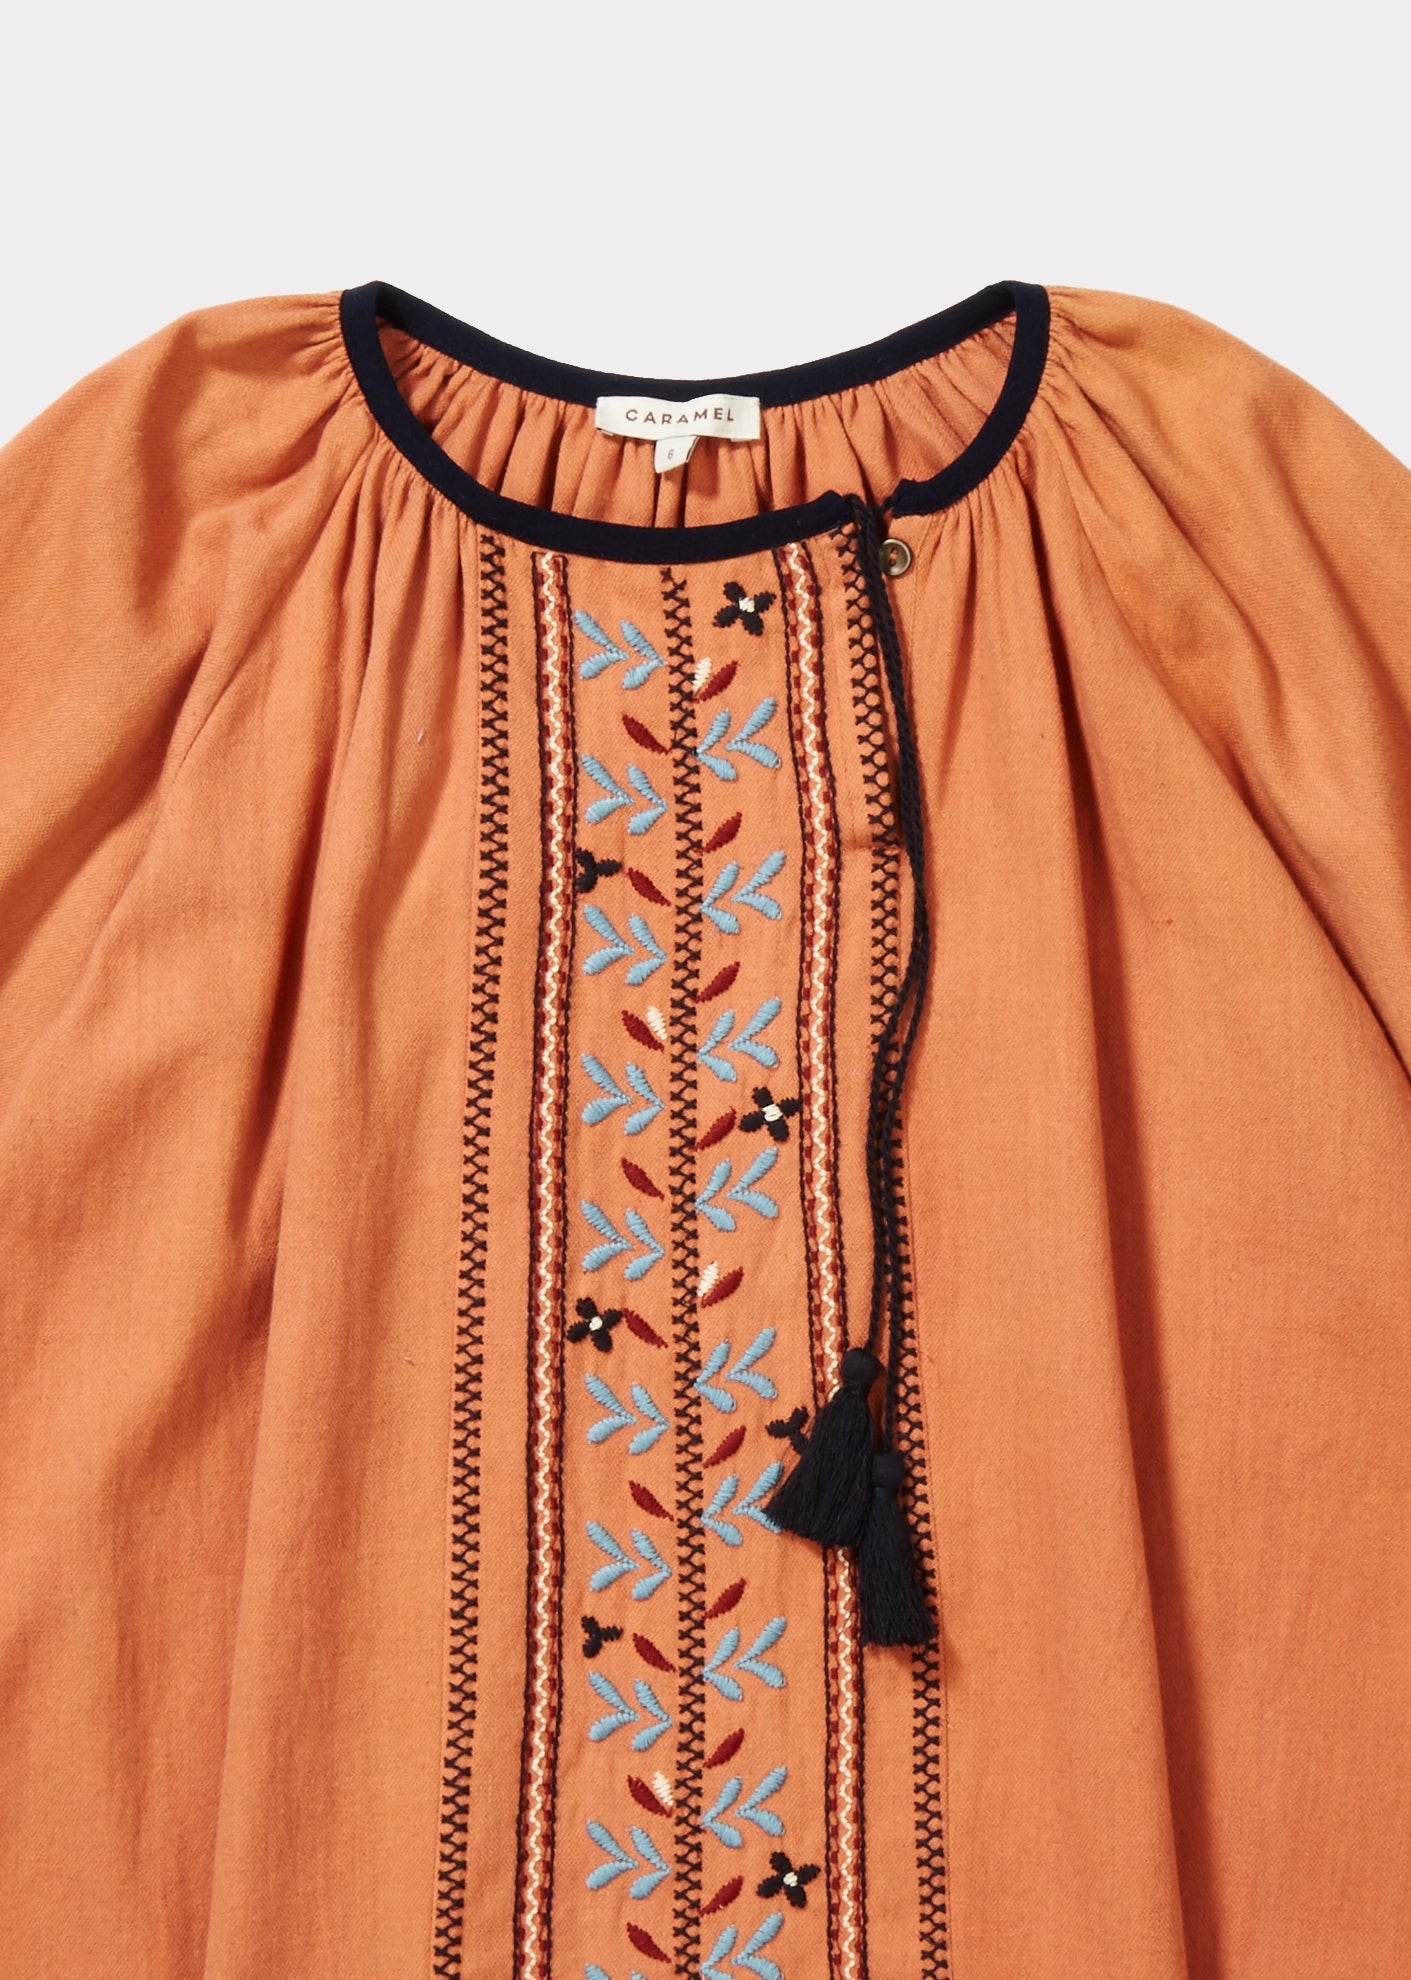 LYDFORD EMBROIDERY DRESS - PERSIMMON